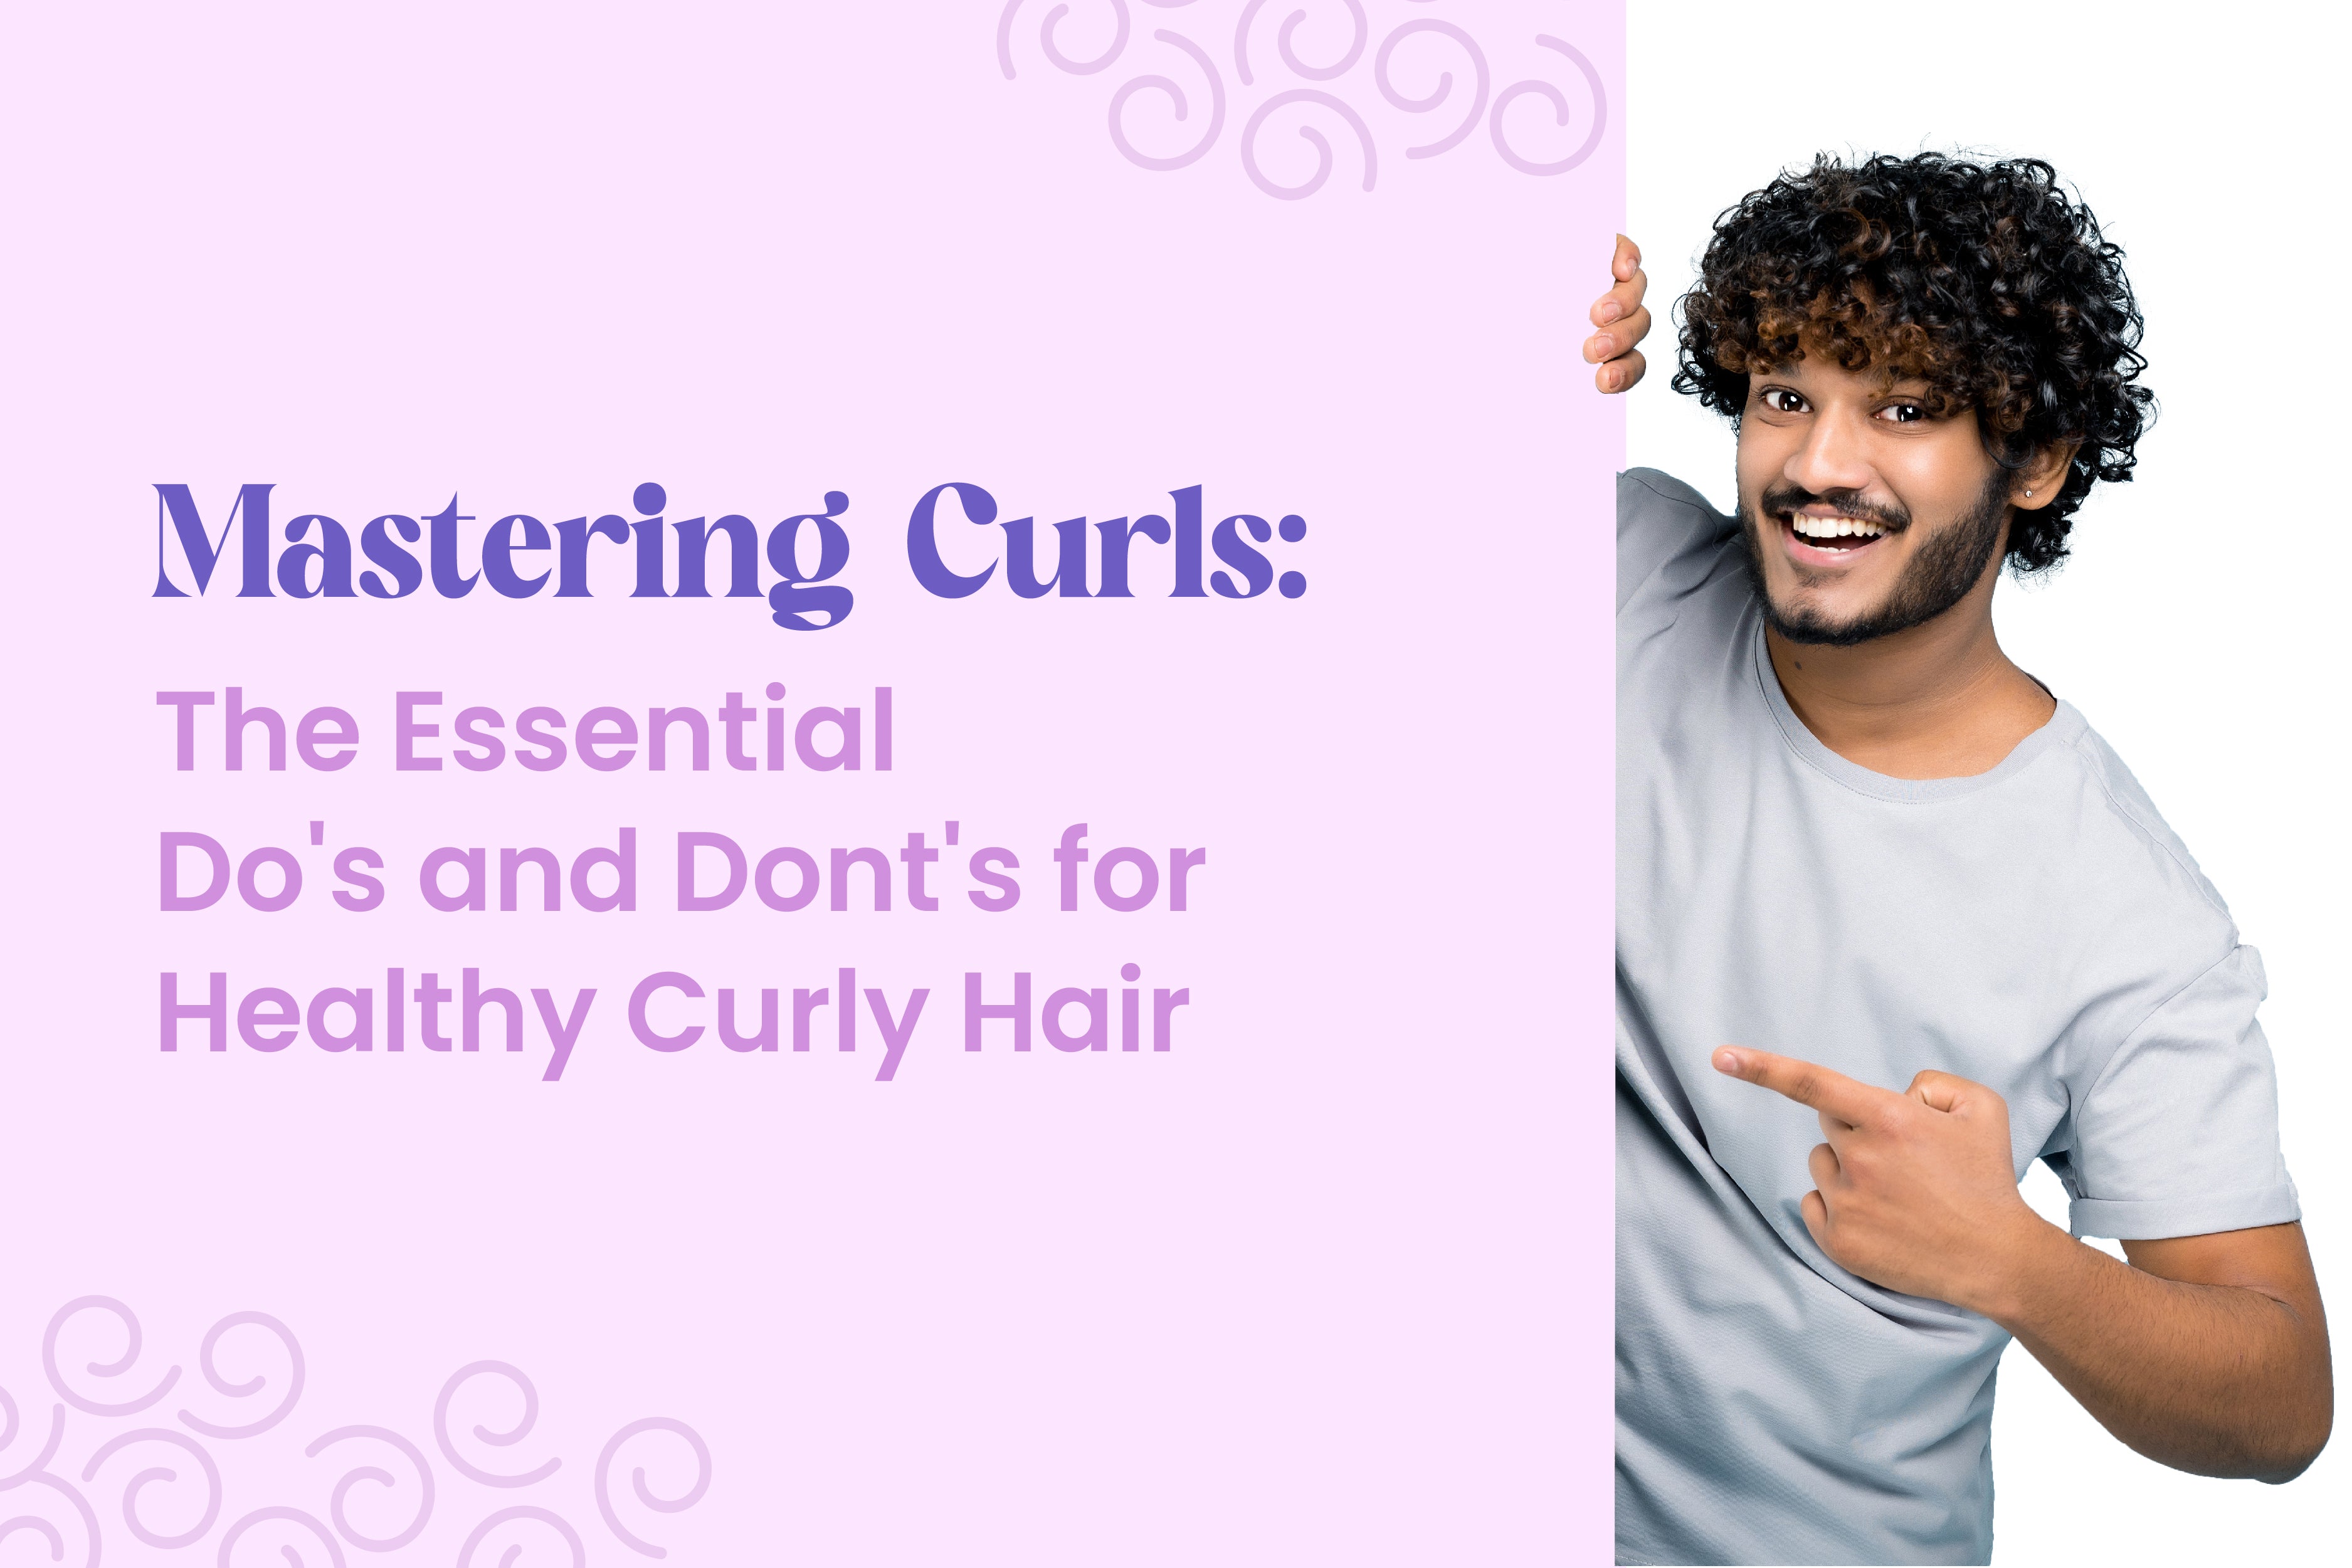 Mastering Curls: The Essential Do's and Dont's for Healthy Curly Hair